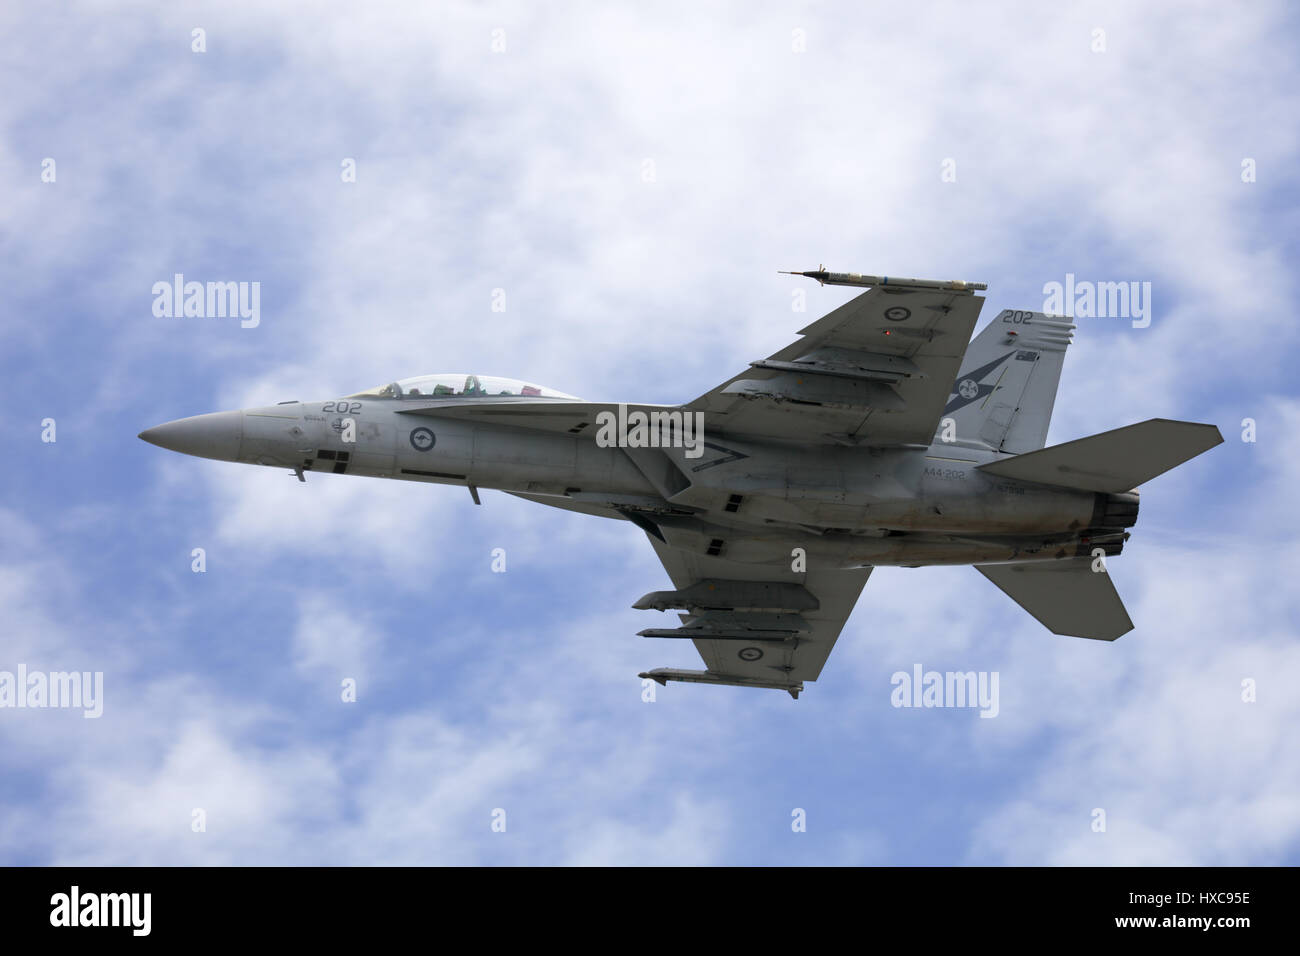 MELBOURNE, AUSTRALIA - MARCH 24: An Royal Australian Air Force FA18F Super Hornet performs in a public display above Melbourne on March 24, 2017 Stock Photo